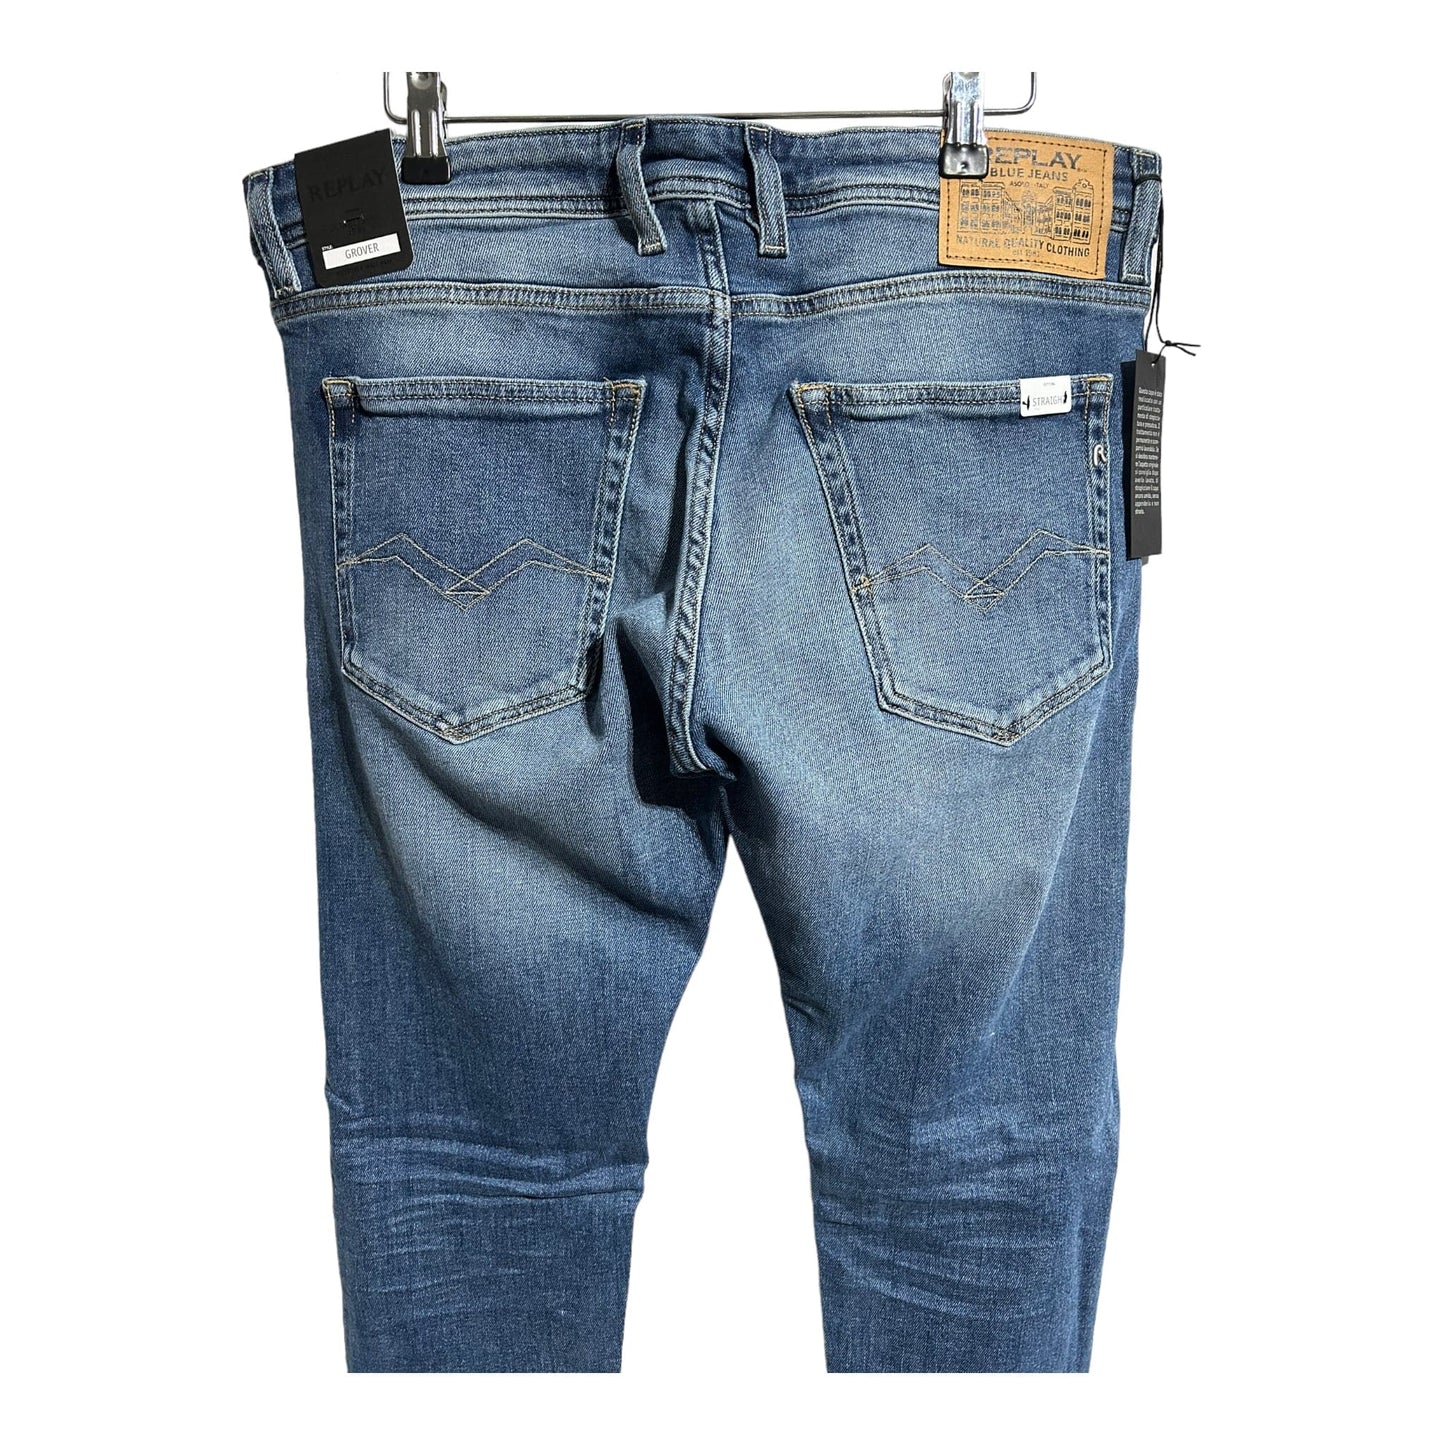 Replay Grover Straight Stretch Jeans - Recurring.Life